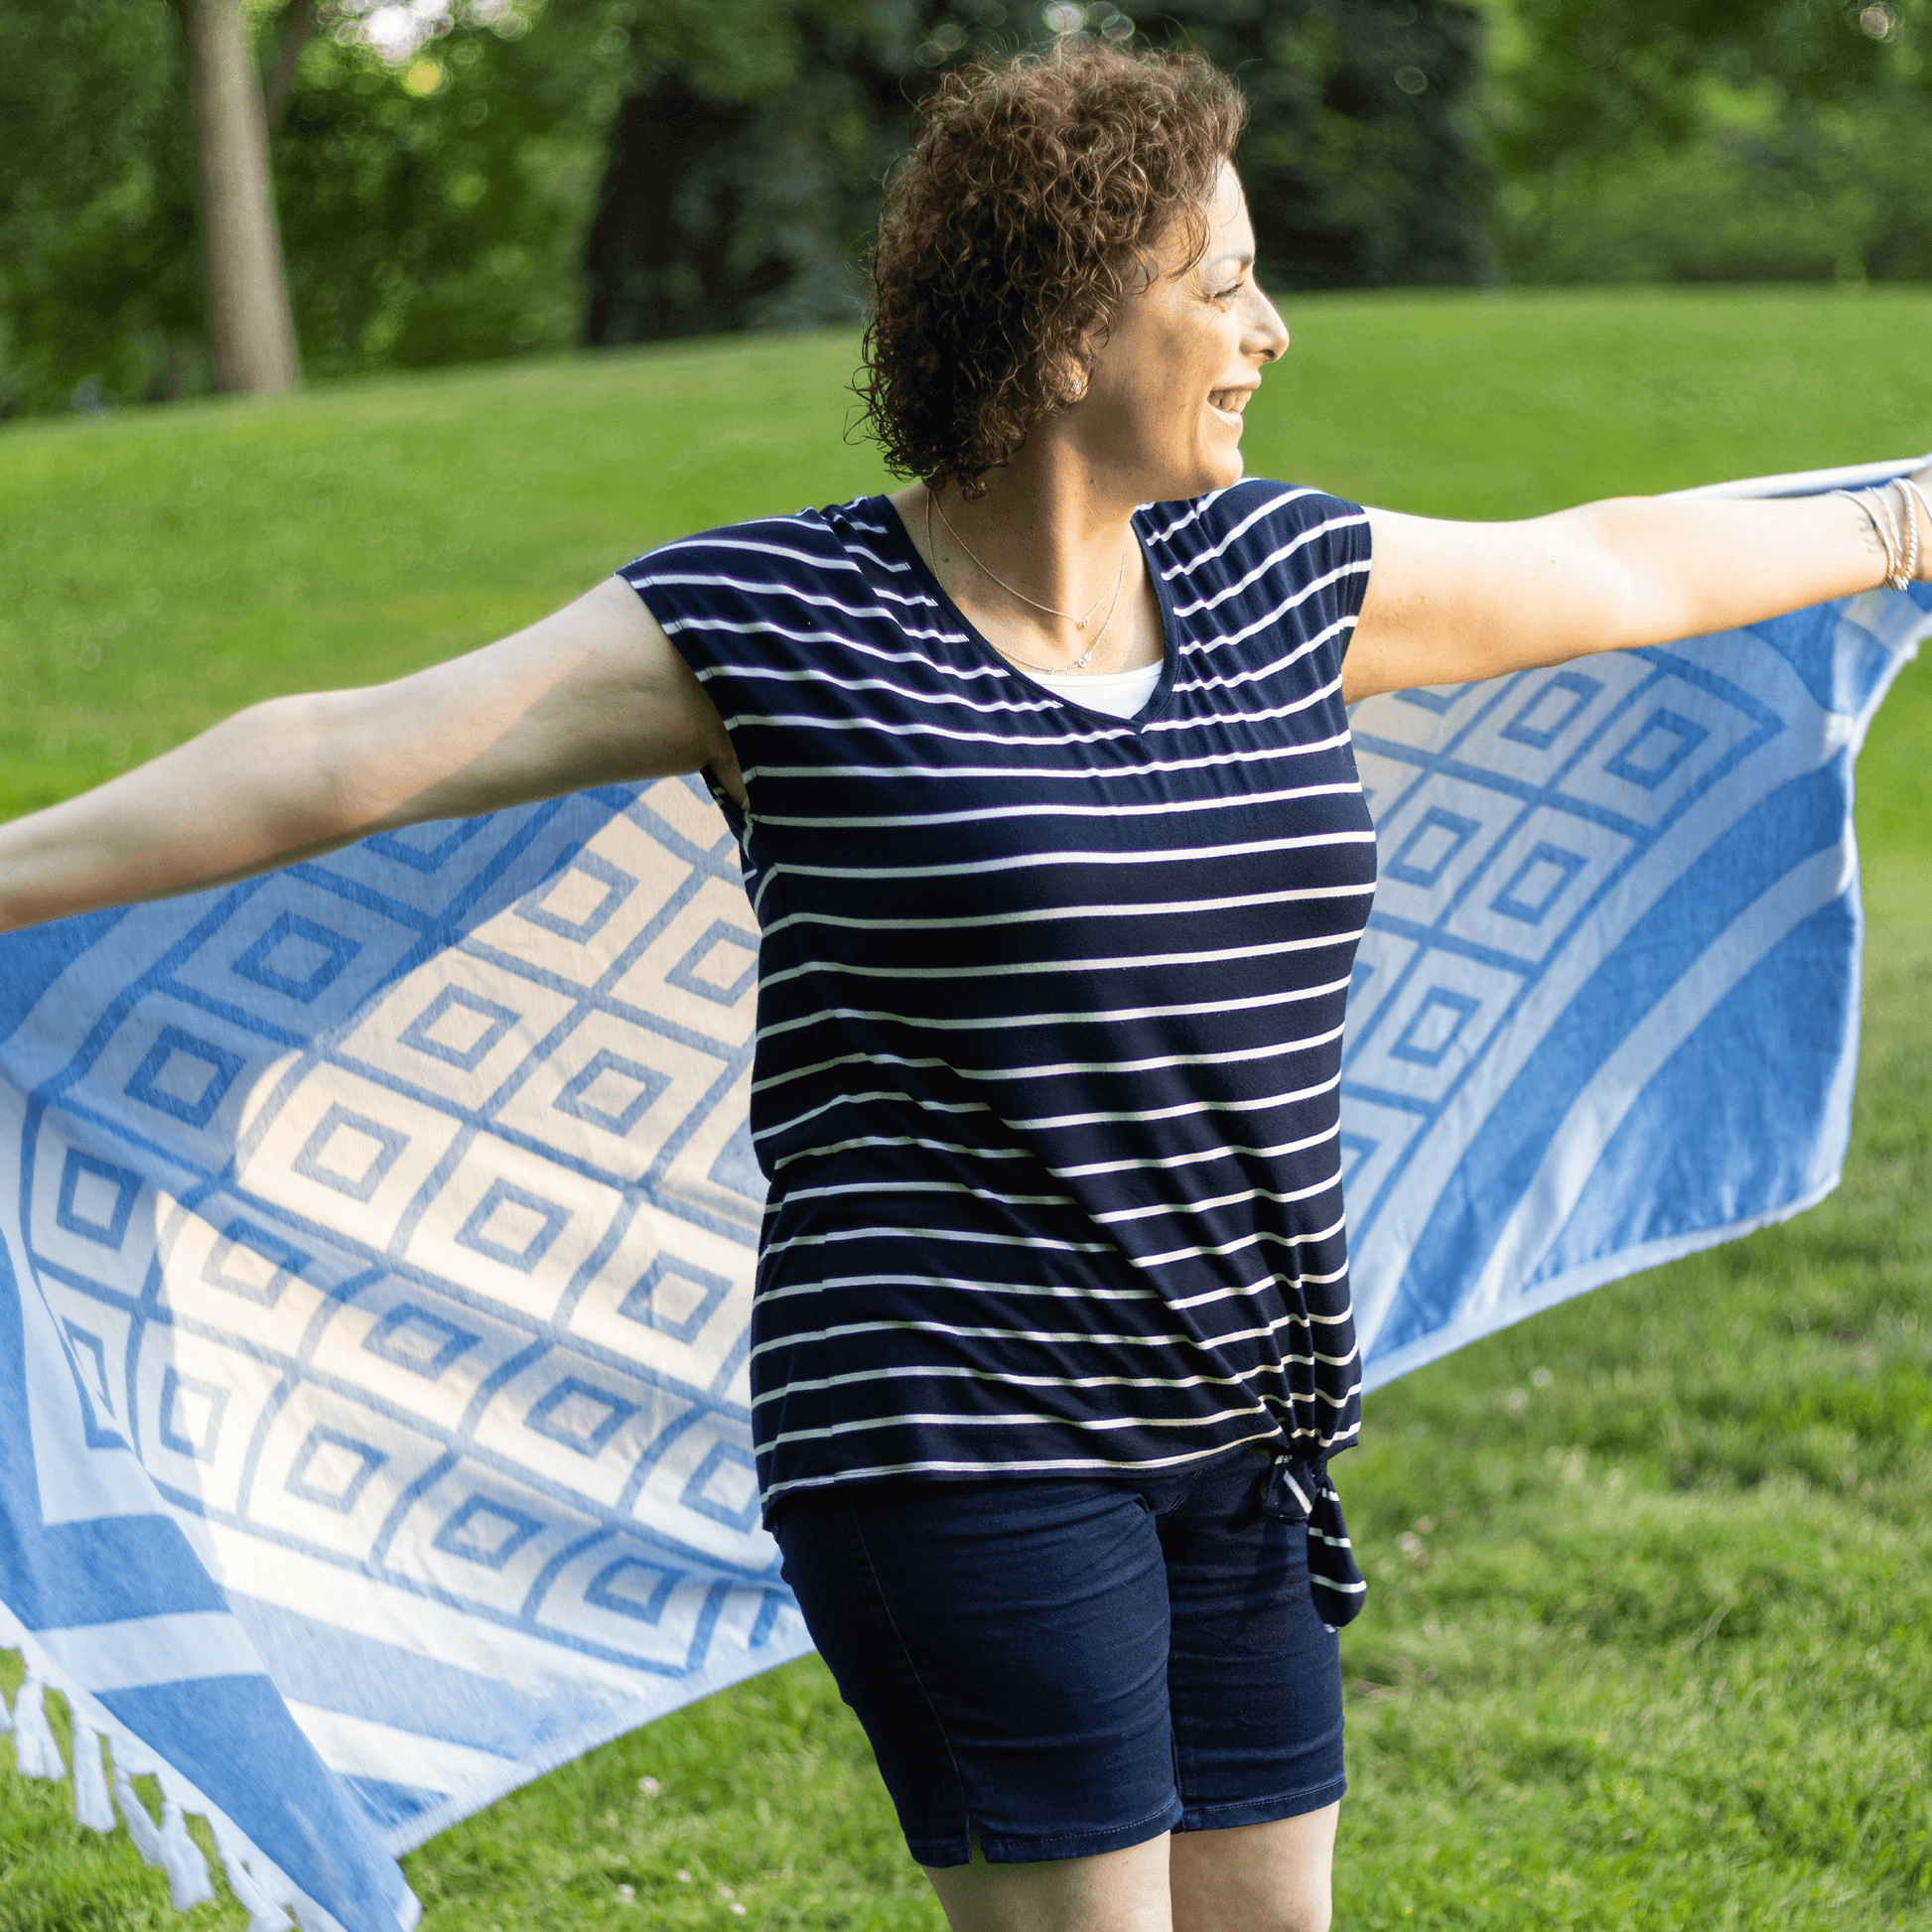 Smiling woman holds out a blue and white Turkish towel outside by green grass